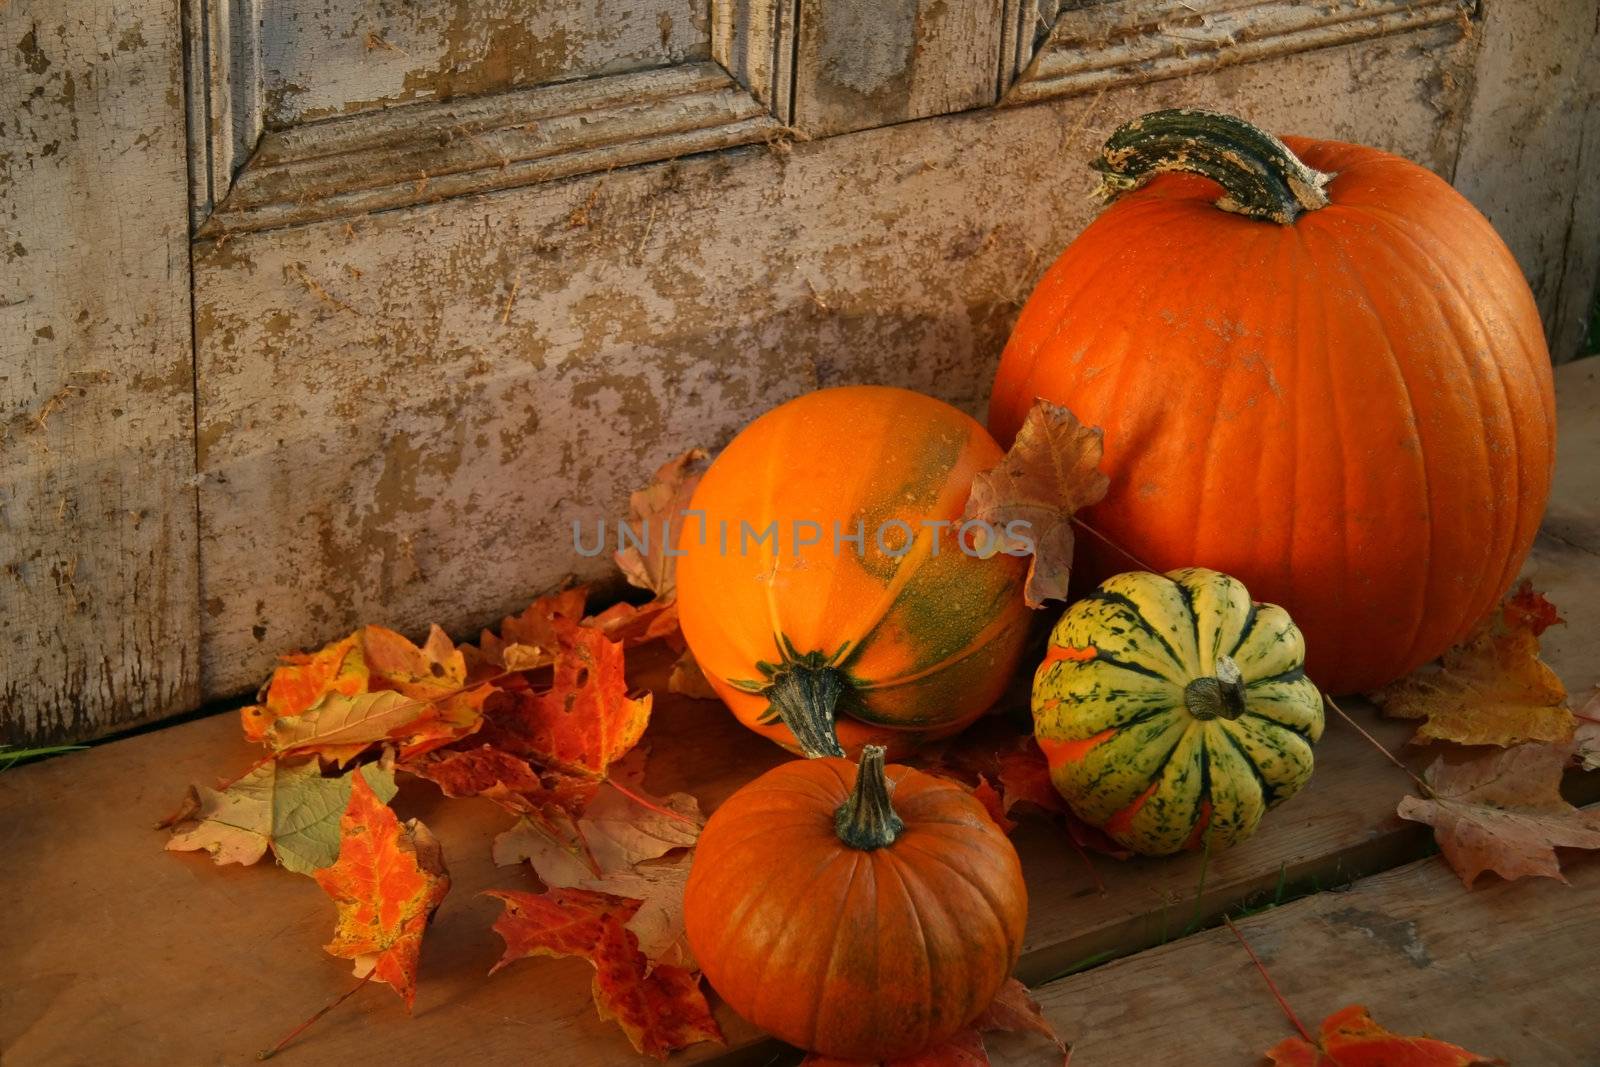 Pumpkins and gourds at the door ready for halloween